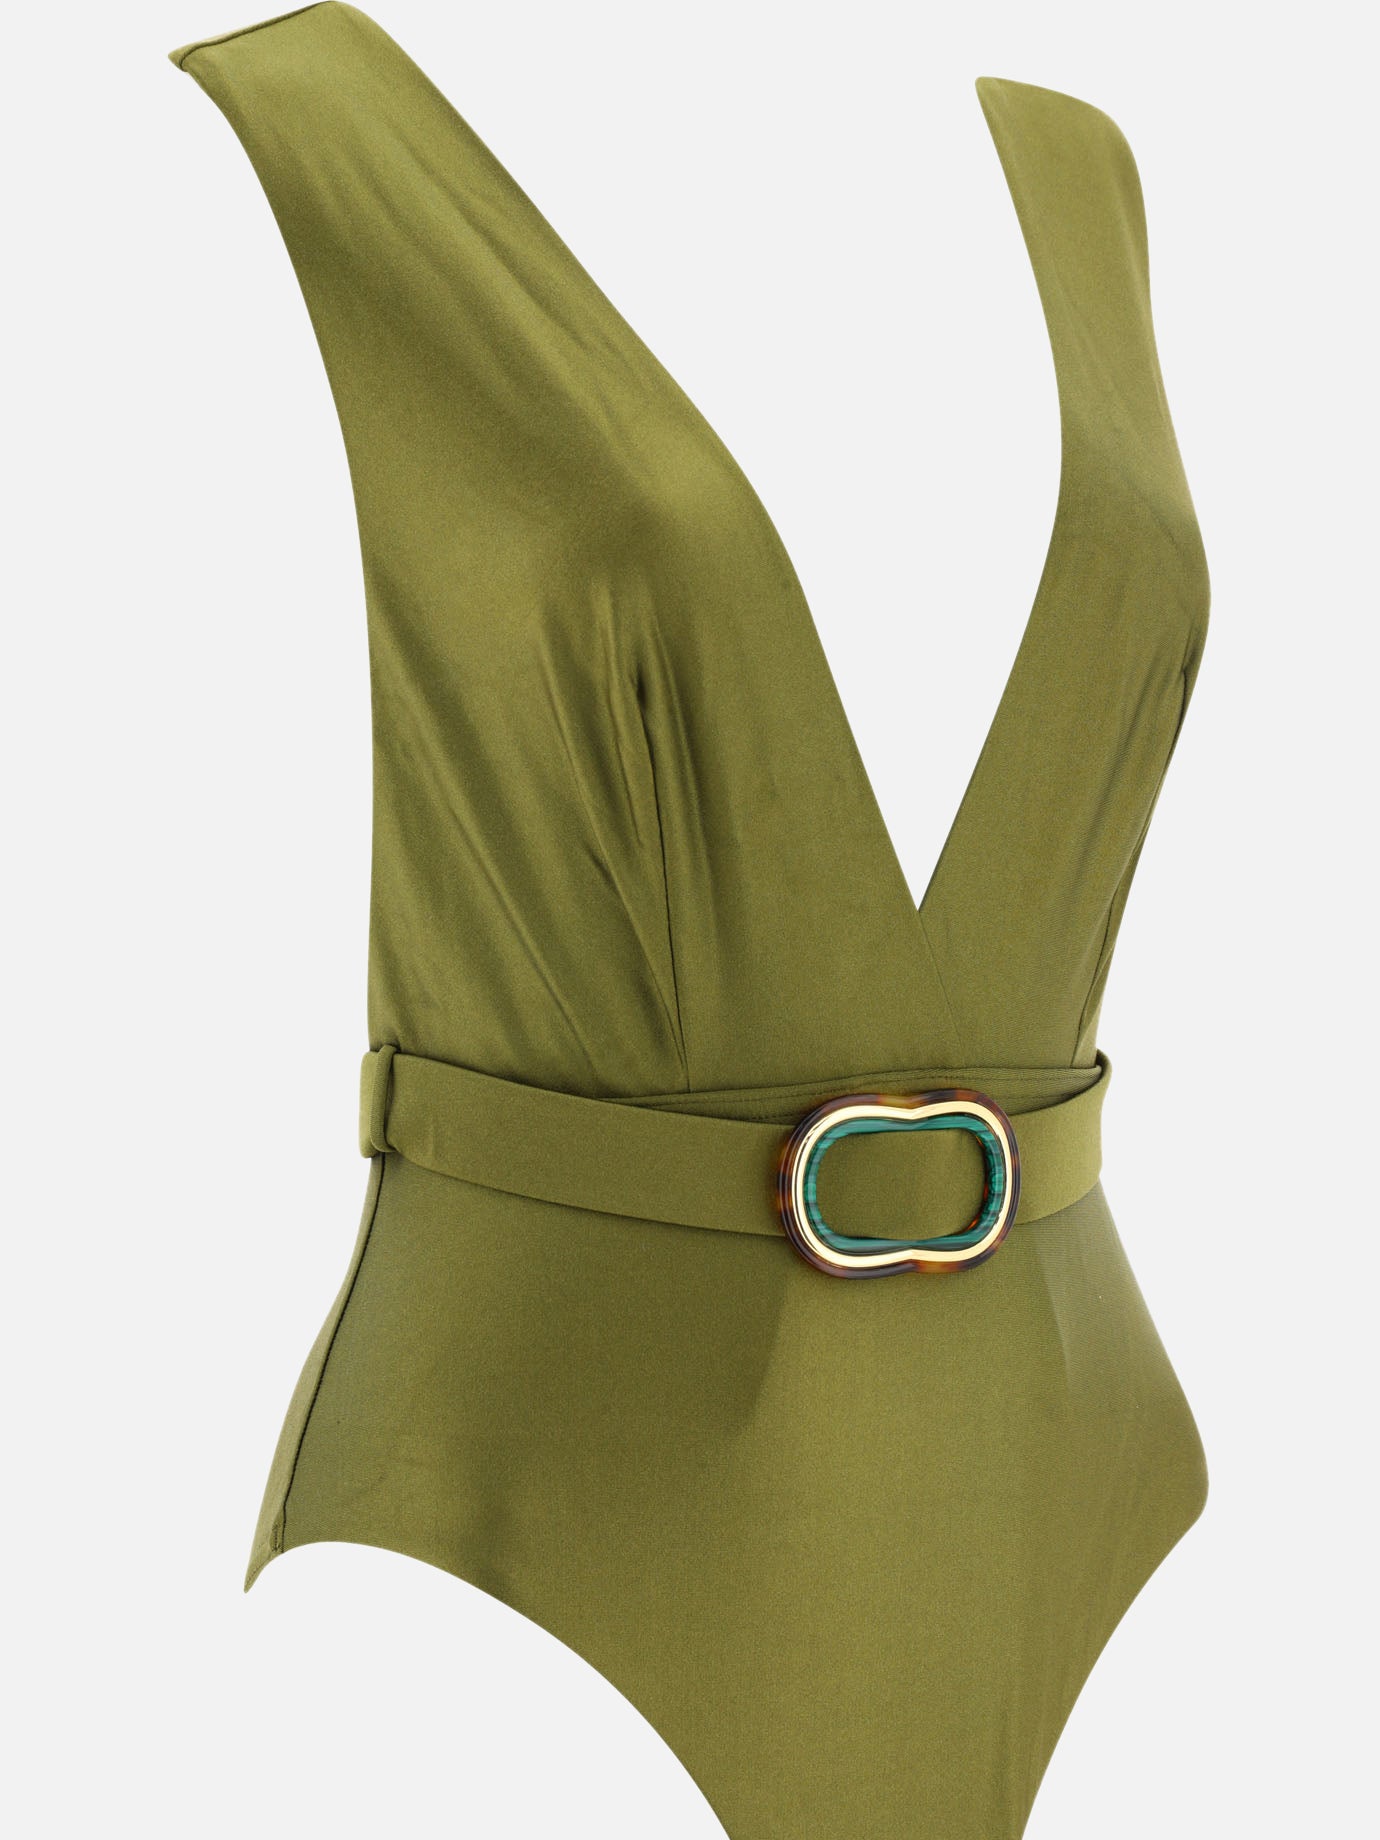 "Belted Junie" swimsuit